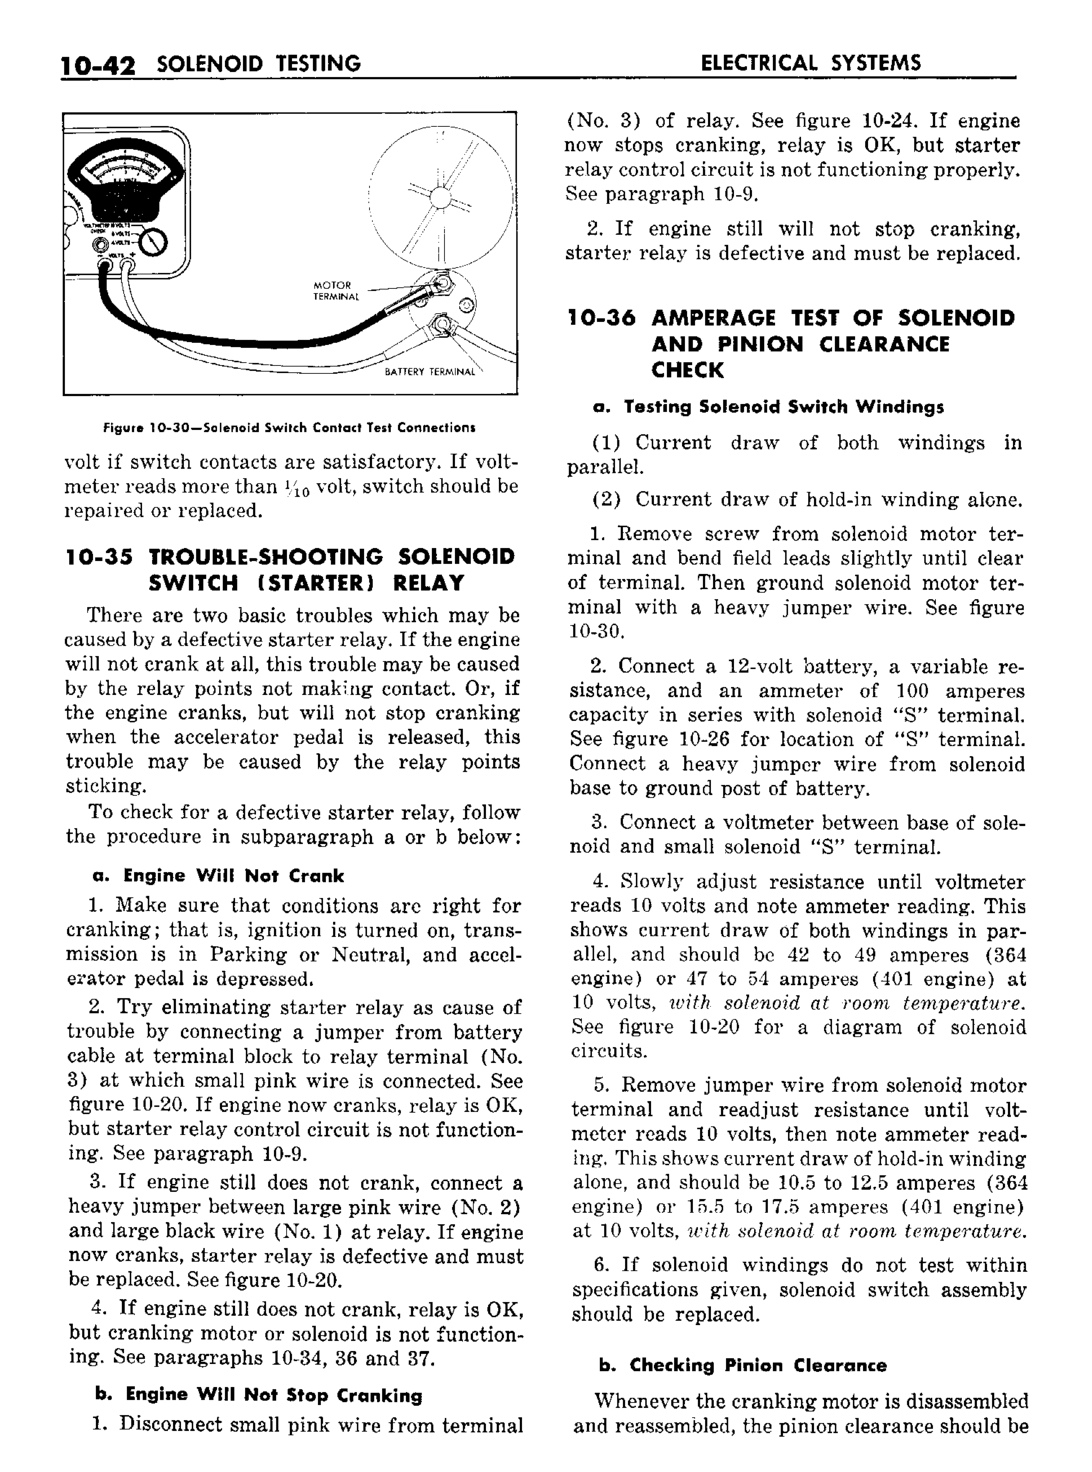 n_11 1960 Buick Shop Manual - Electrical Systems-042-042.jpg